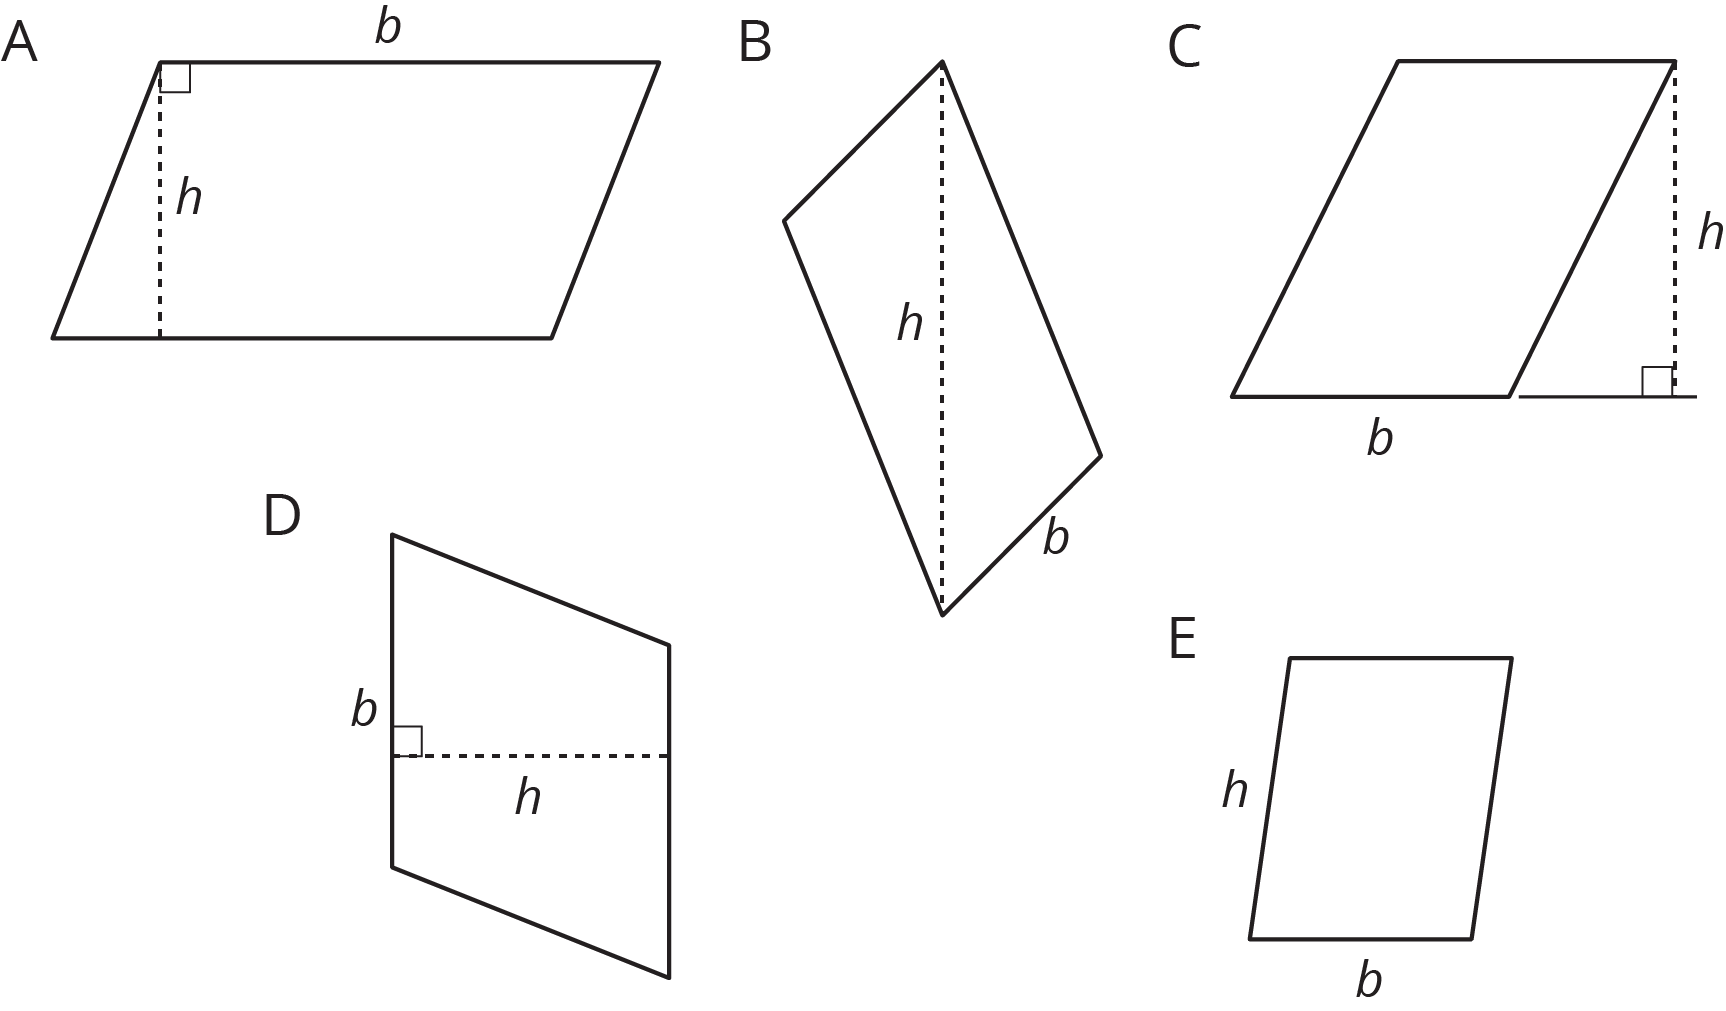 Five parallelograms labeled A--E.